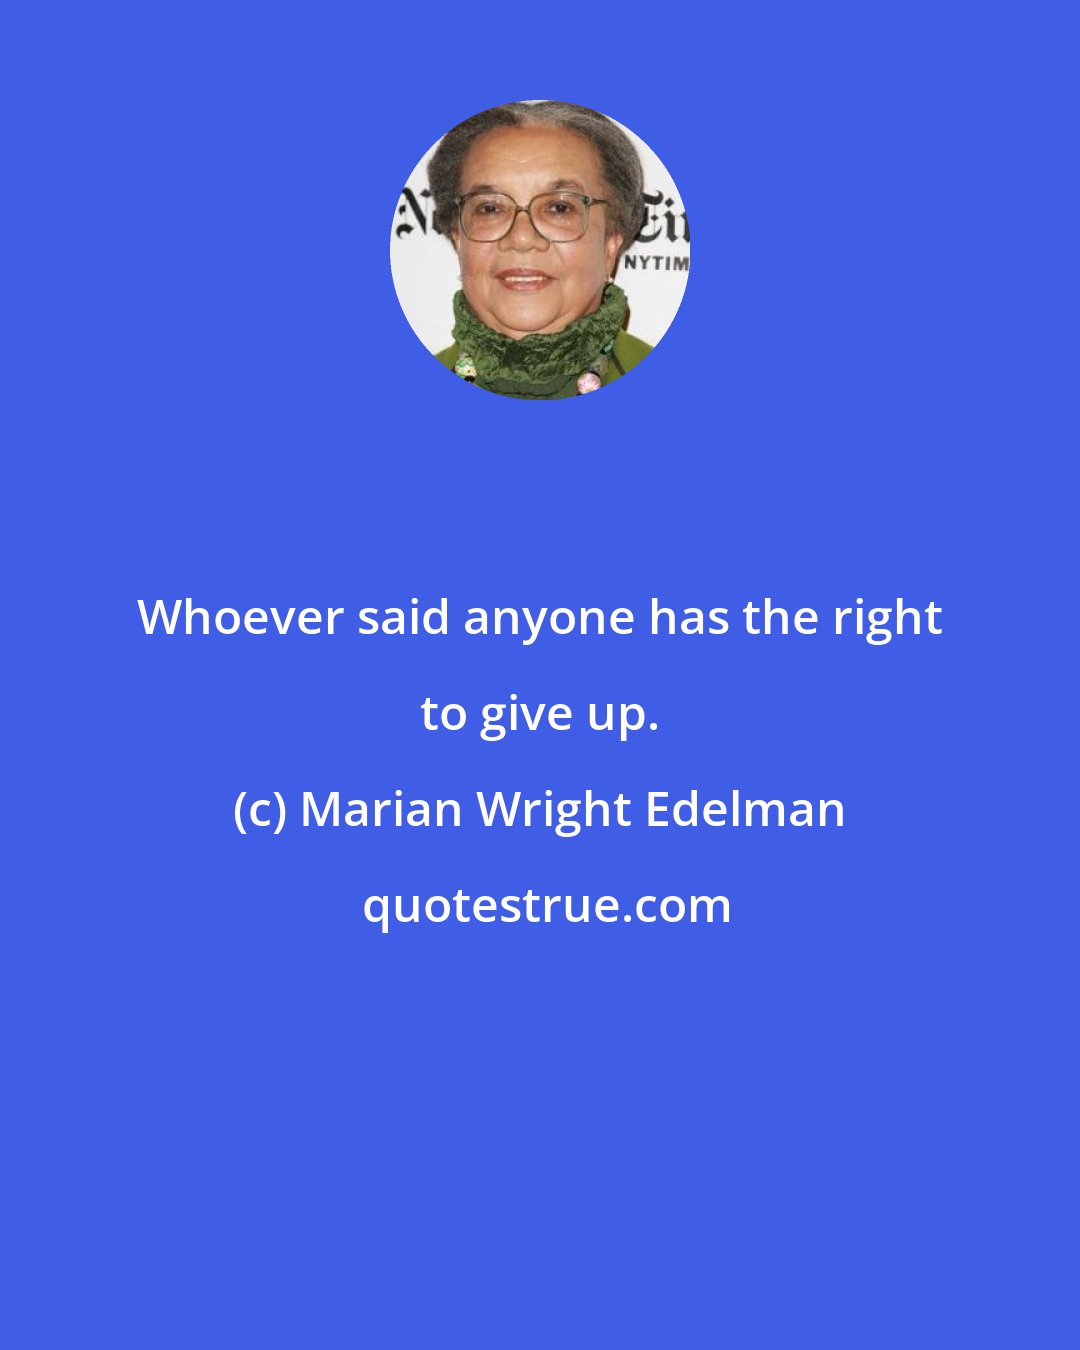 Marian Wright Edelman: Whoever said anyone has the right to give up.